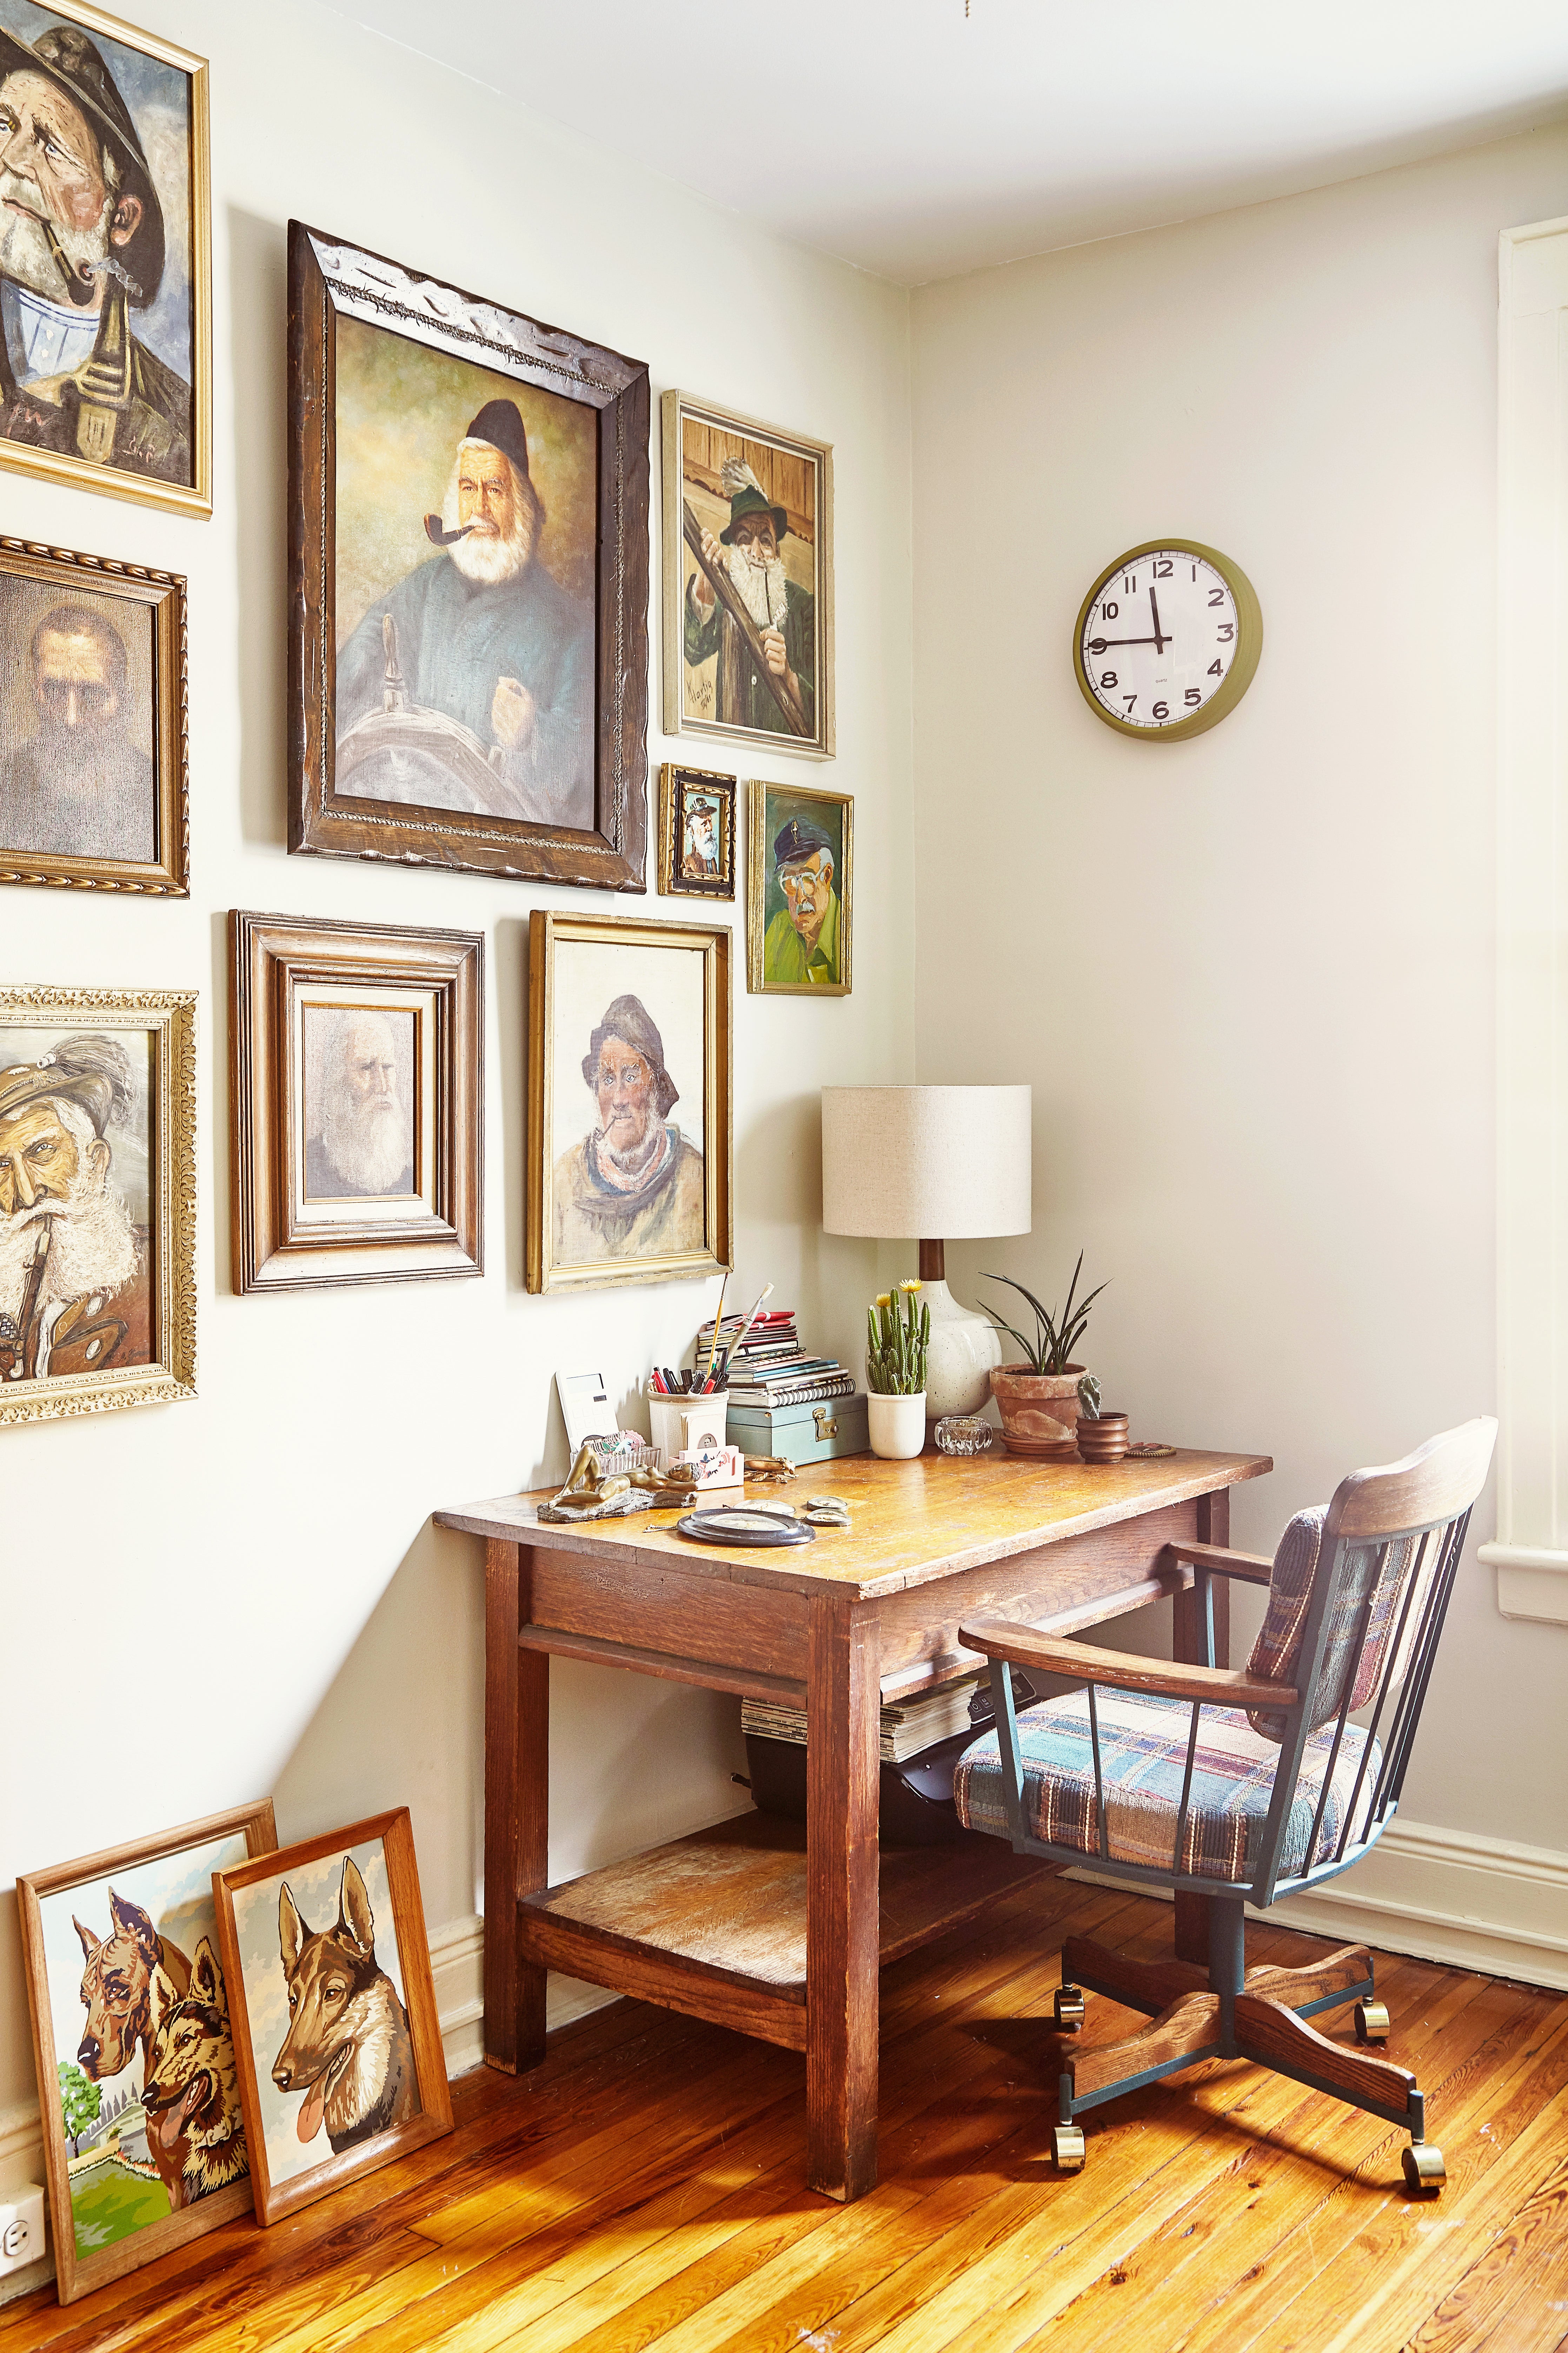 Office with framed old-fashioned paintings on gallery wall; wooden desk with chair